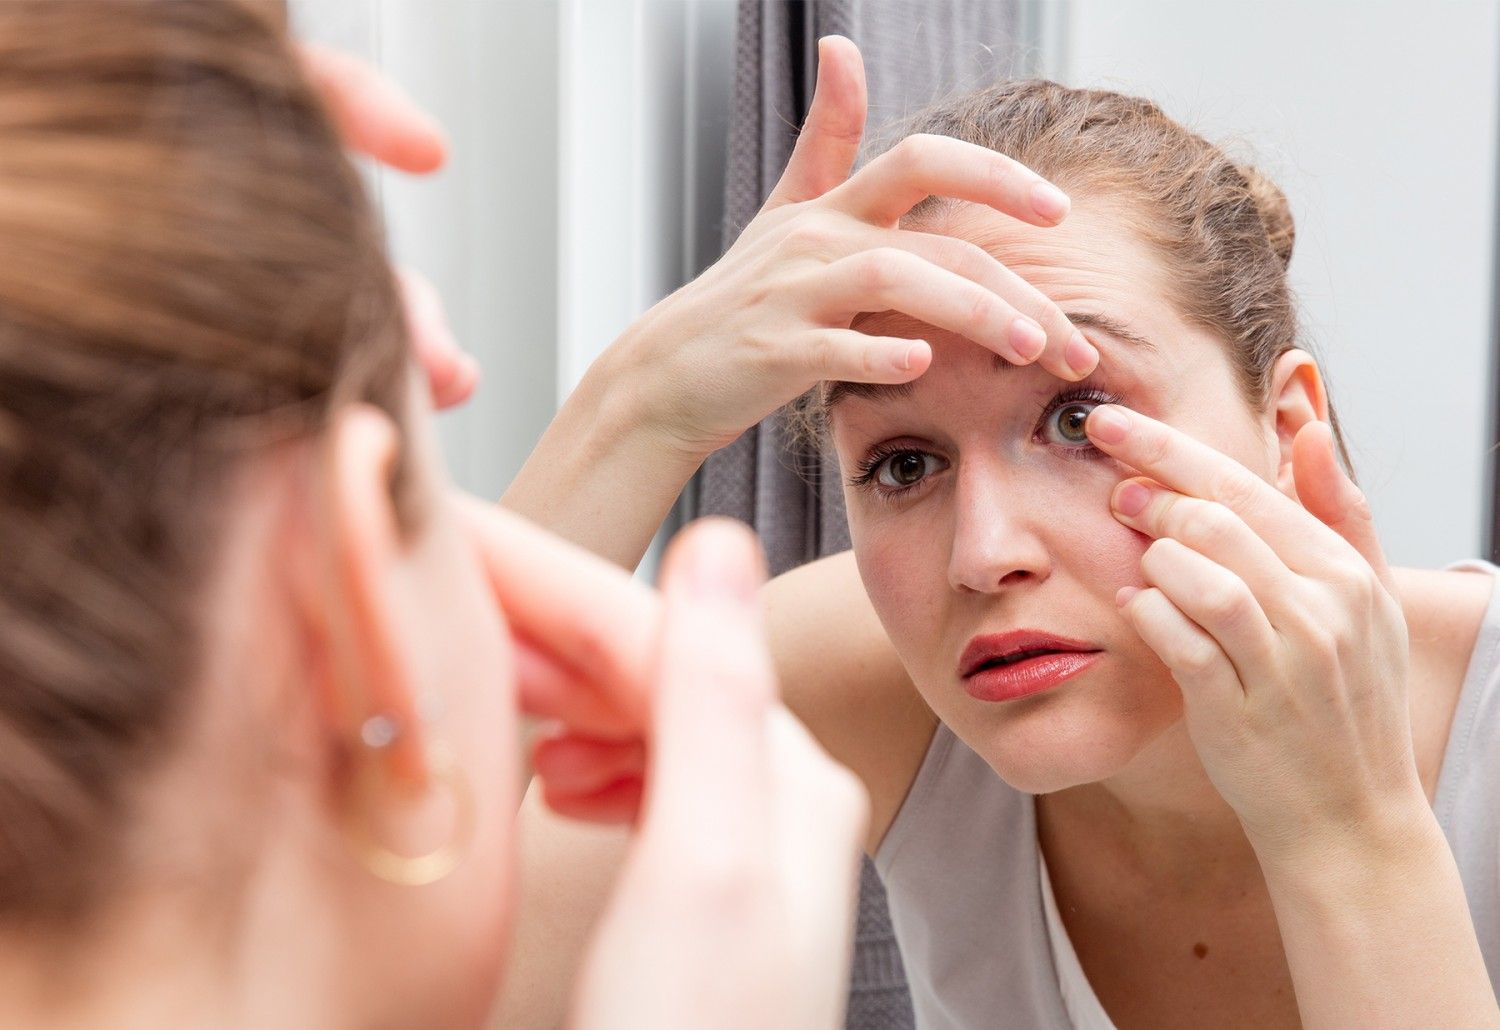 9 Things Only People Who Wear Contact Lenses Will